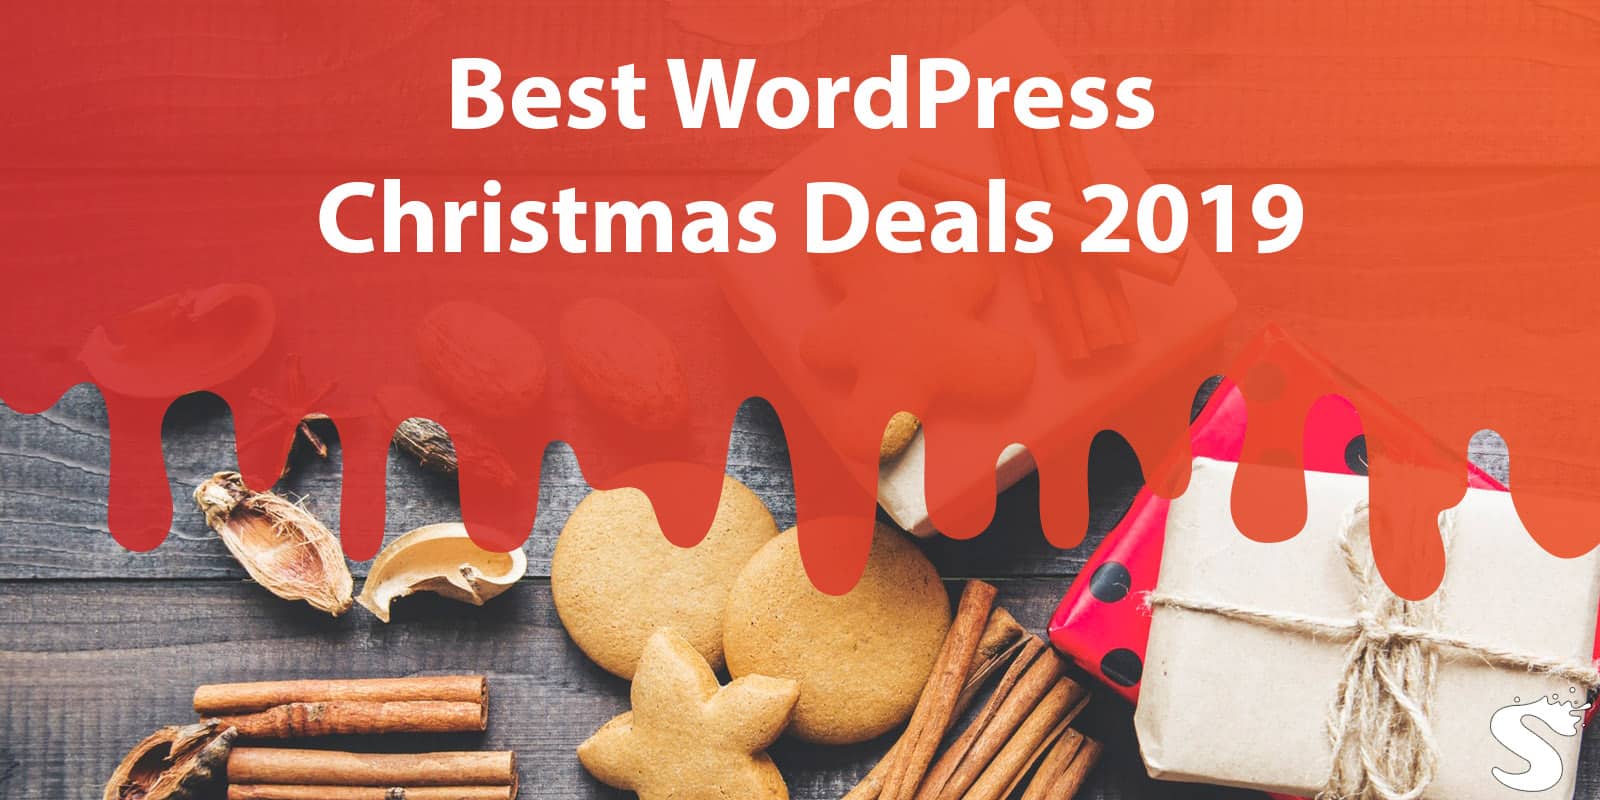 WordPress Christmas Deals and New Year Discounts You DON’T Want To Miss